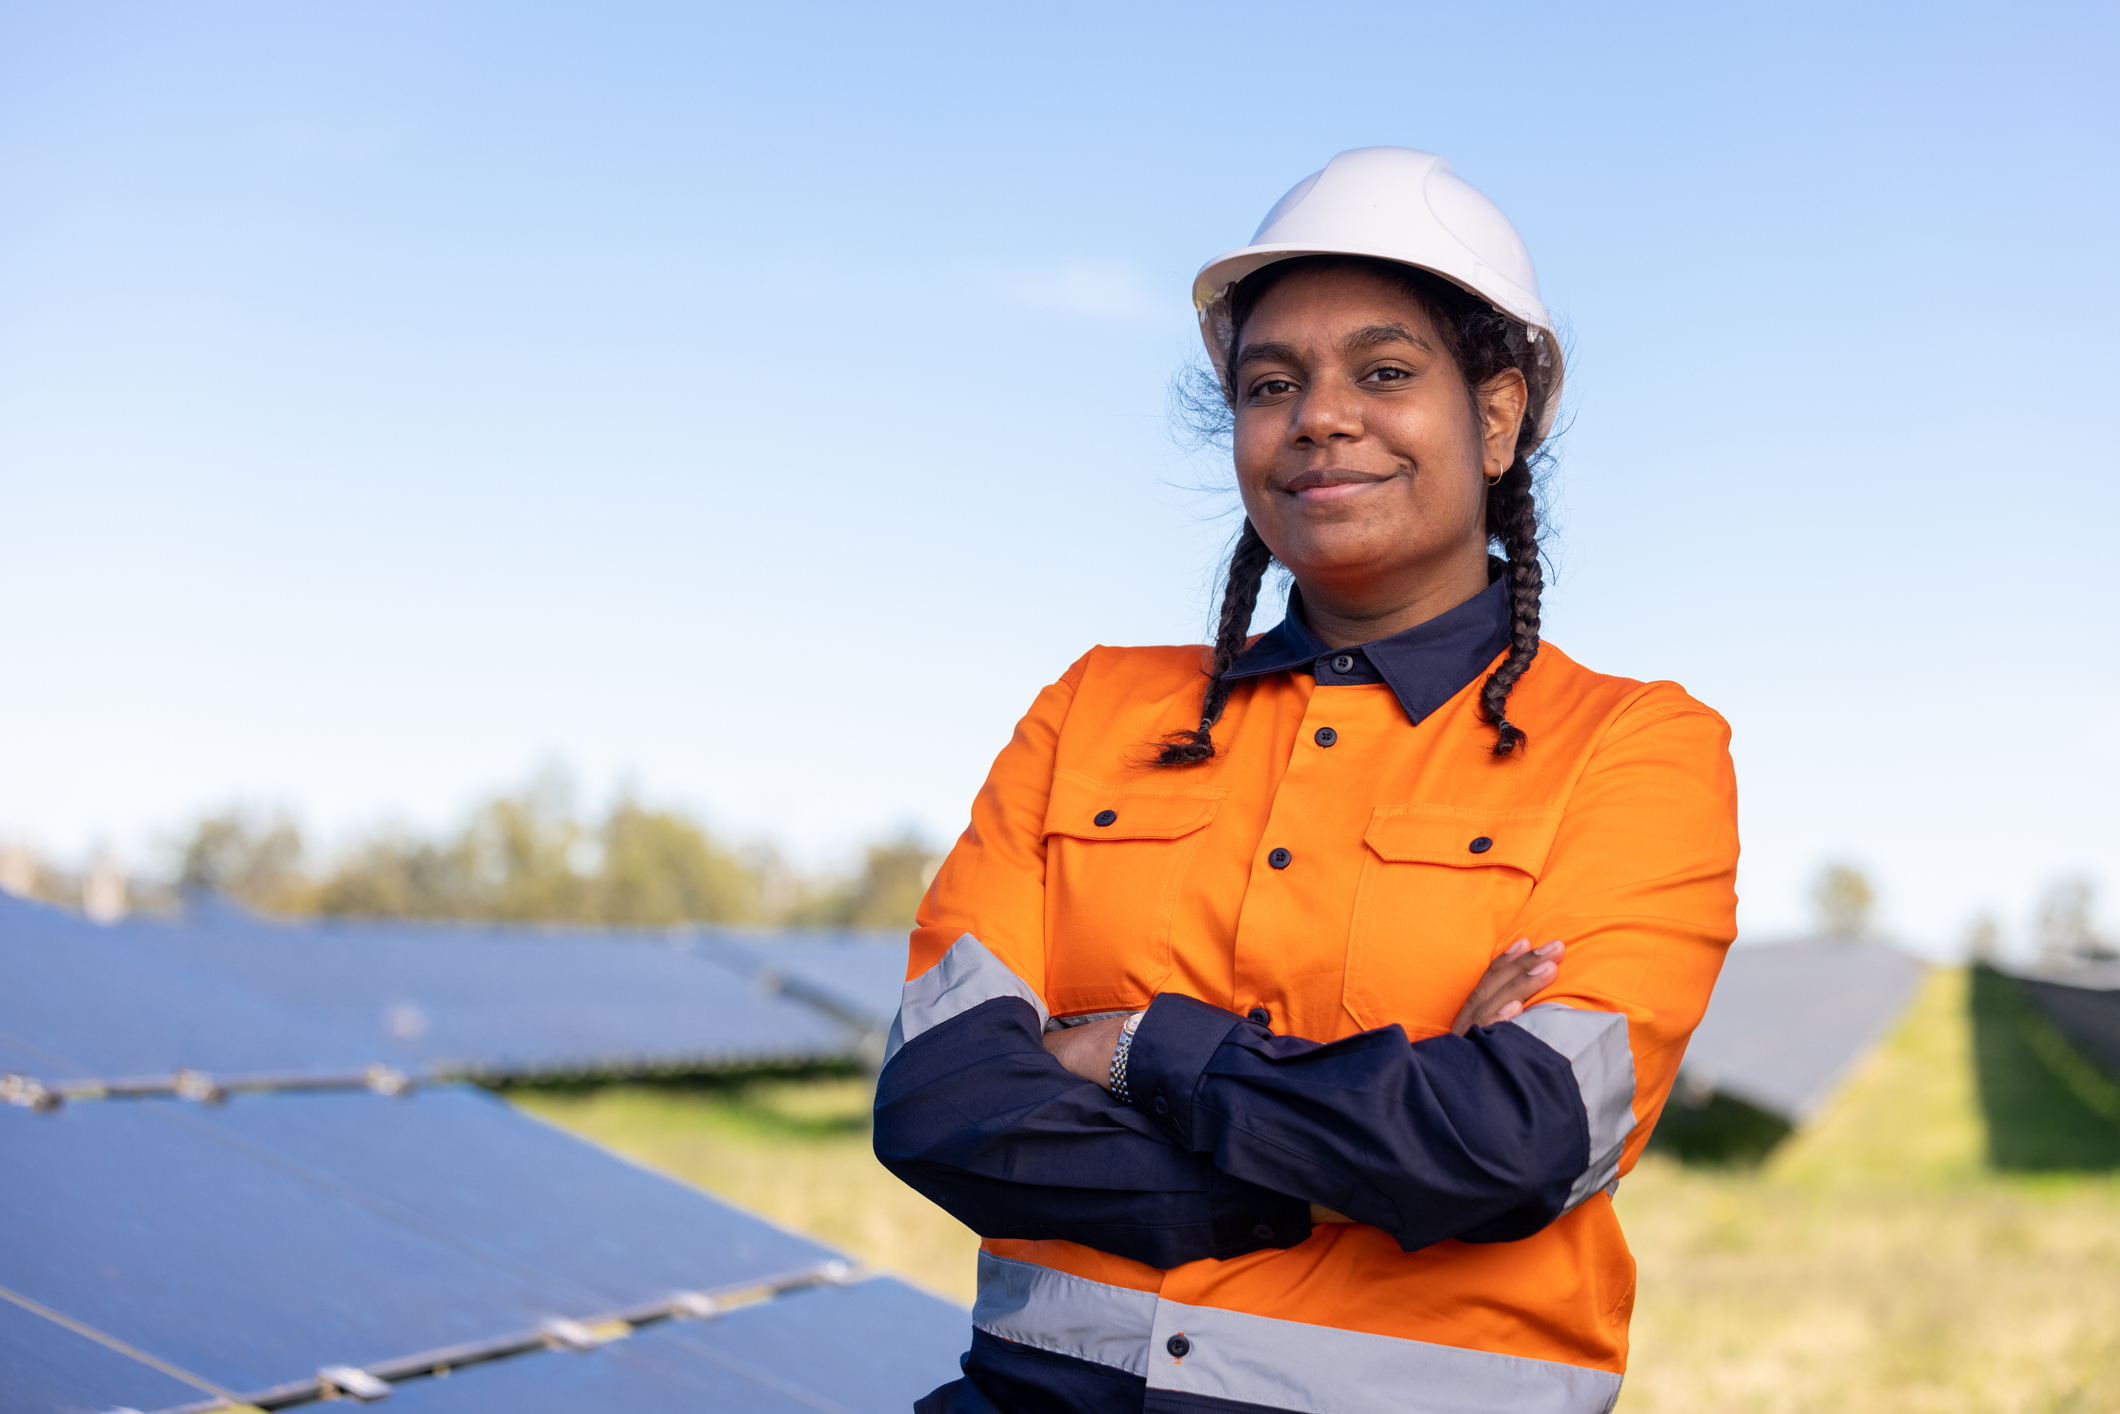 A young woman with brown skin and pigtail braids, wearing a hard hat and orange jacket, stands in front of solar panels.